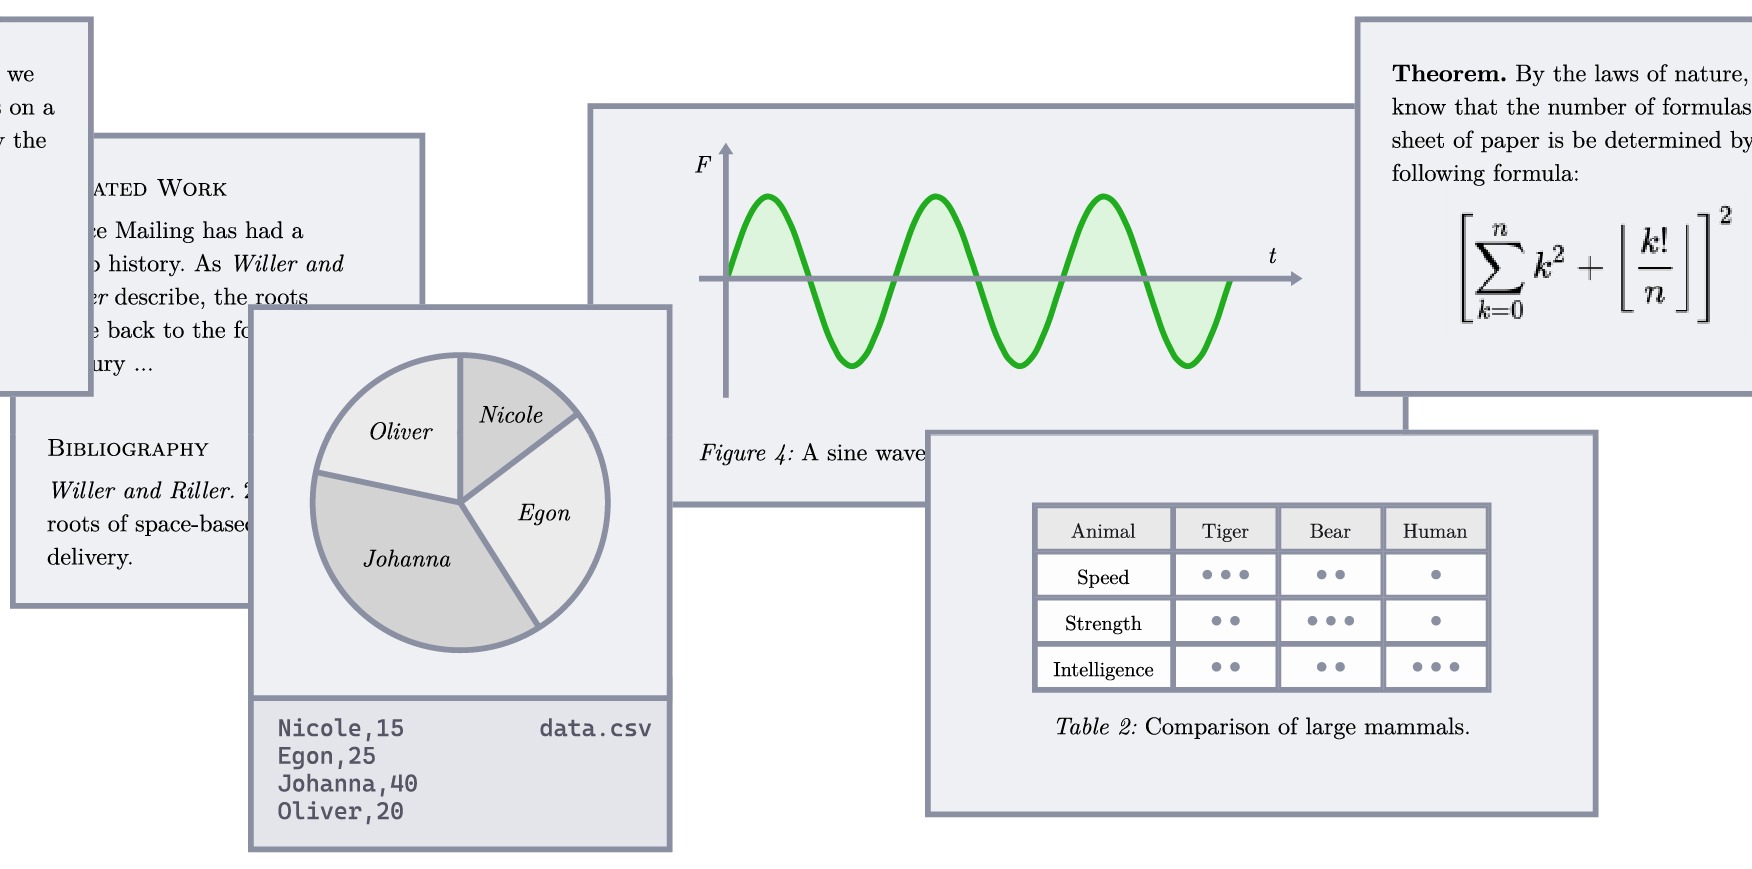 Examples of various elements frequently seen in scientific publications: References and a Bibliography, a chart created from a CSV file, a sine wave chart, a mathematical formula, and a table.